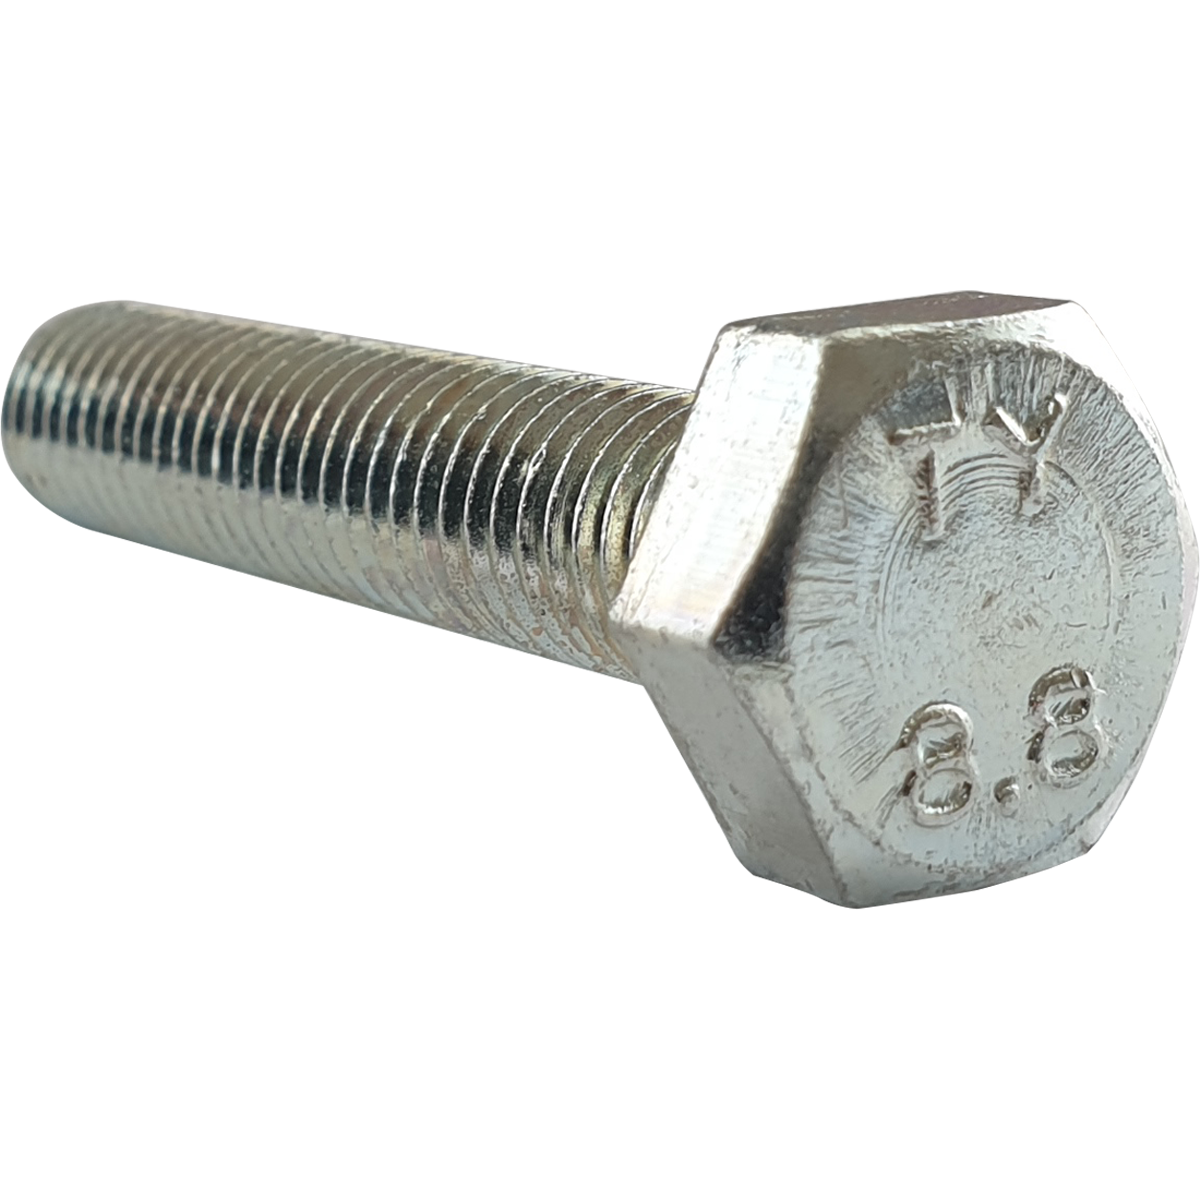 UNF BZP fully threaded hex set screws. Comprehensive range available with quantites starting from just one and bulk discounts availalbe.